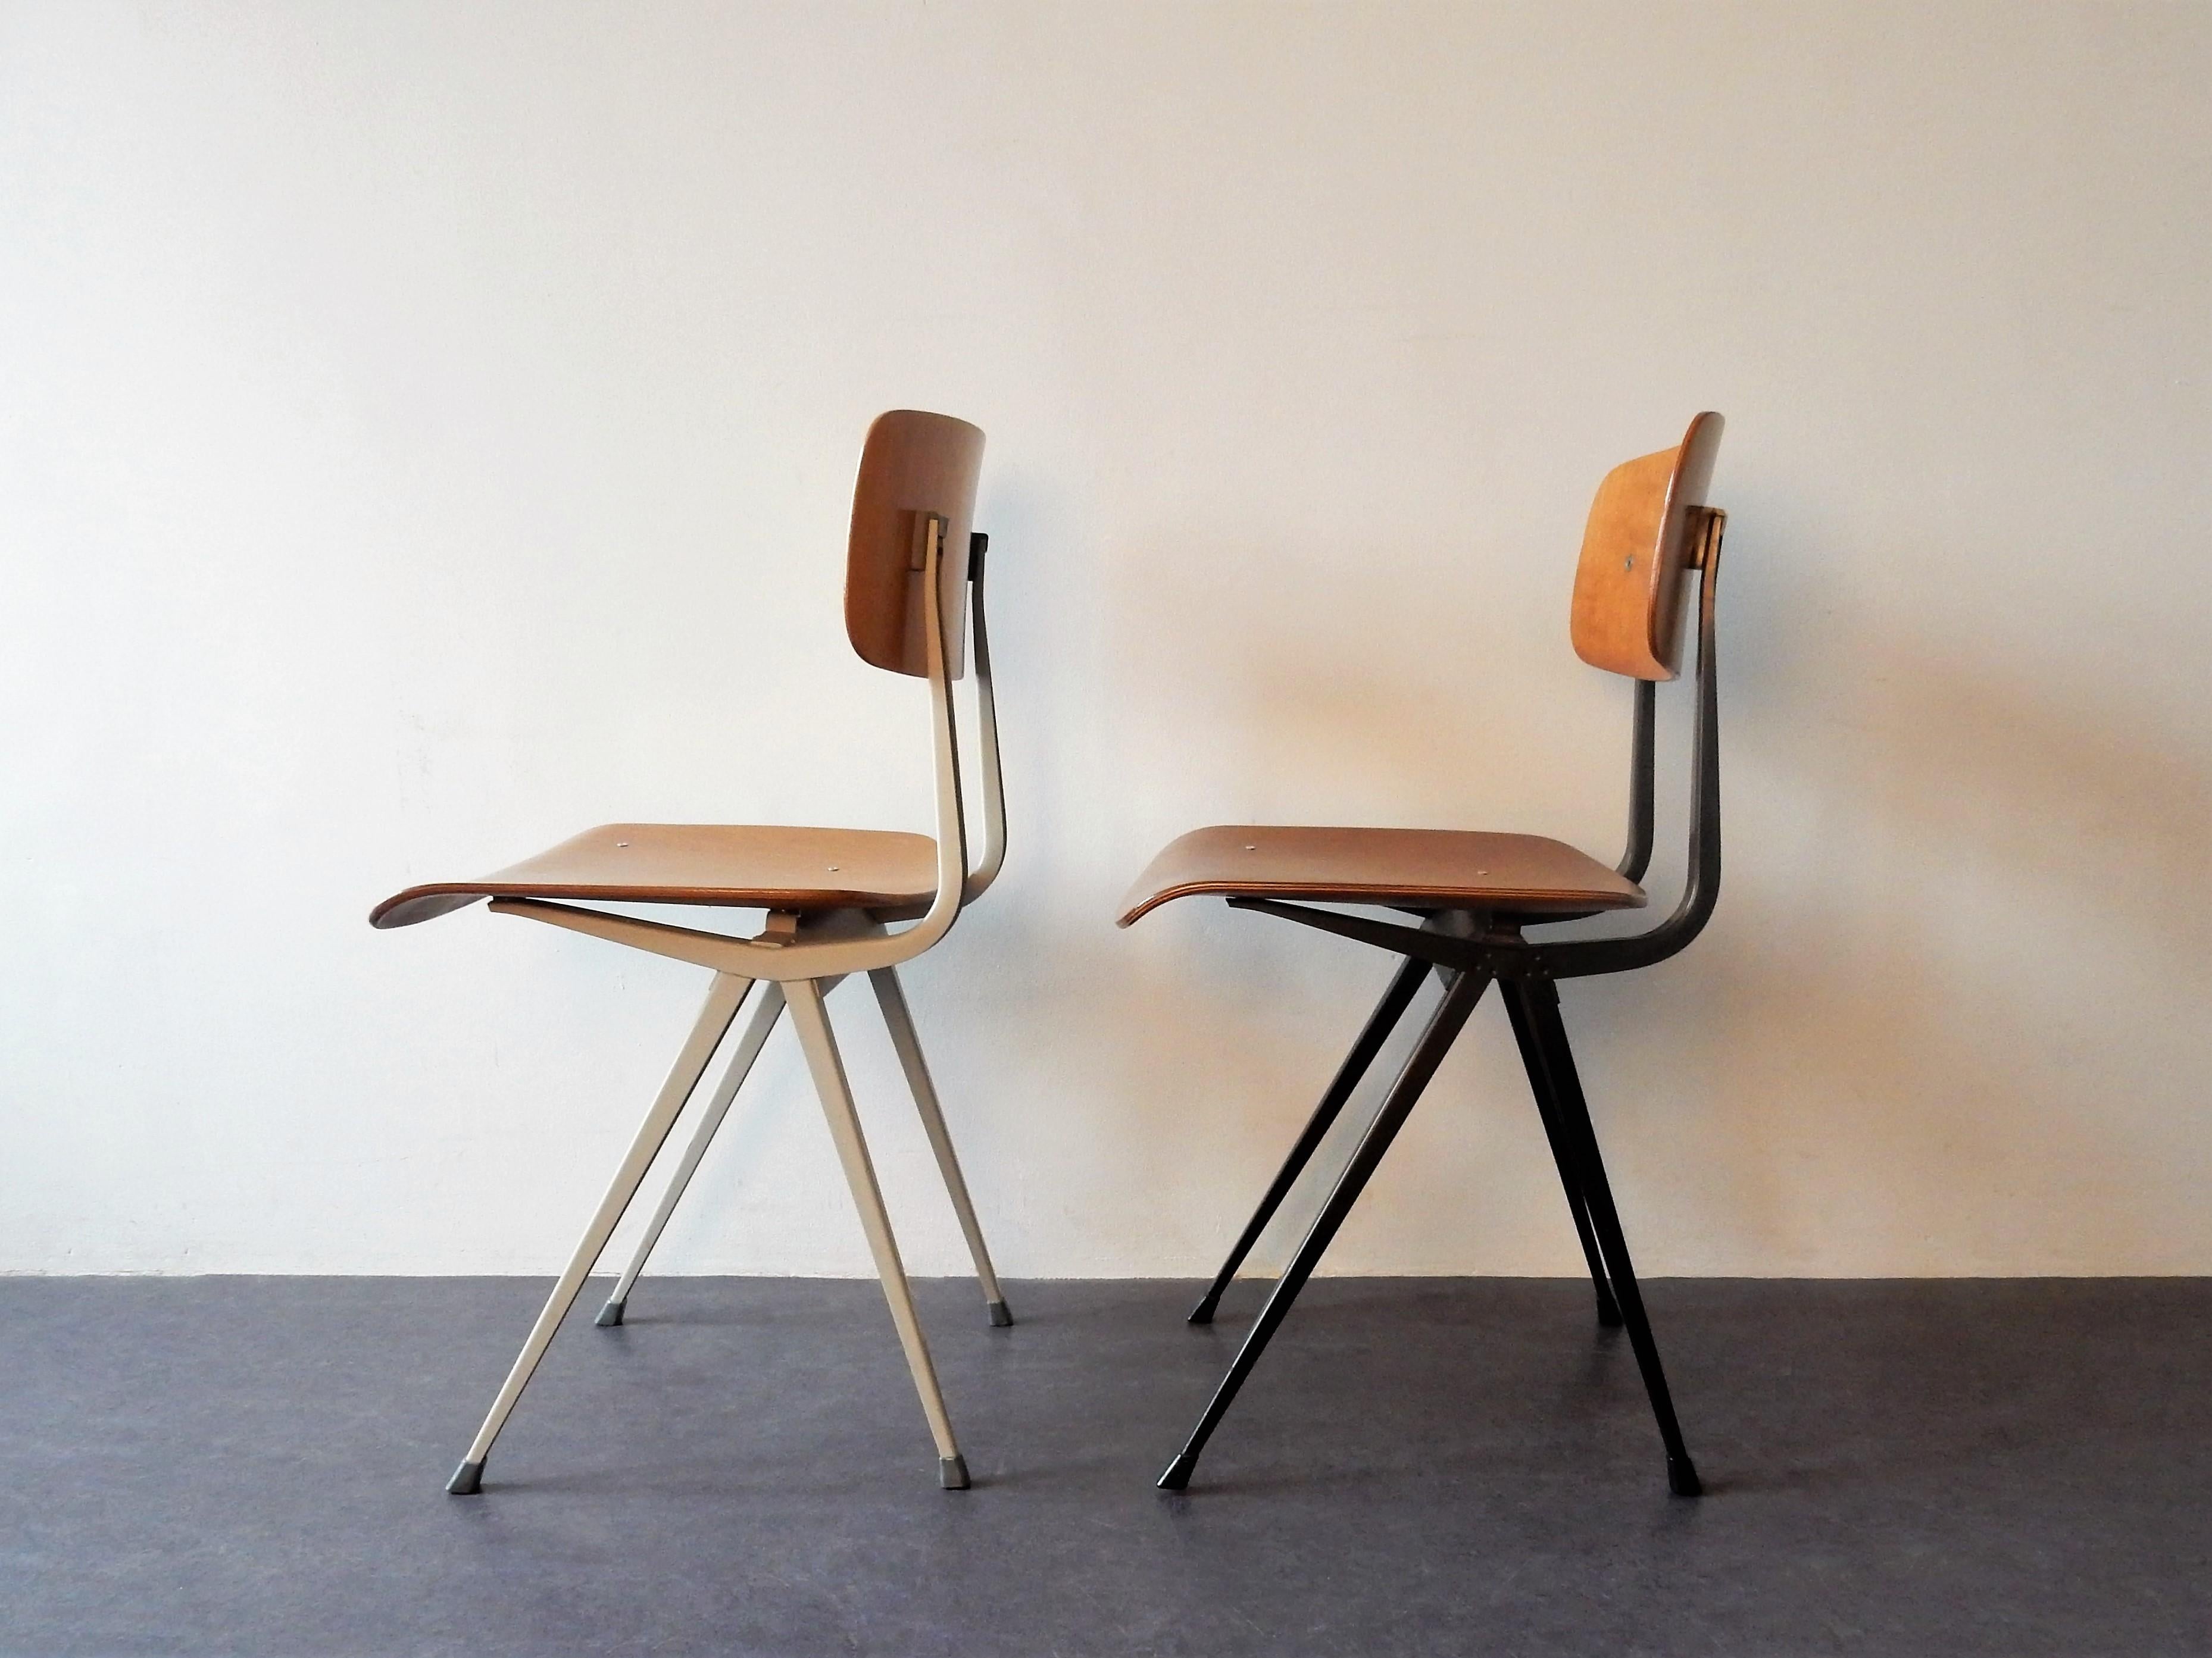 Mid-Century Modern 'Result' Chair by Friso Kramer for Ahrend de Cirkel, 2 Available, 1960s-1970s